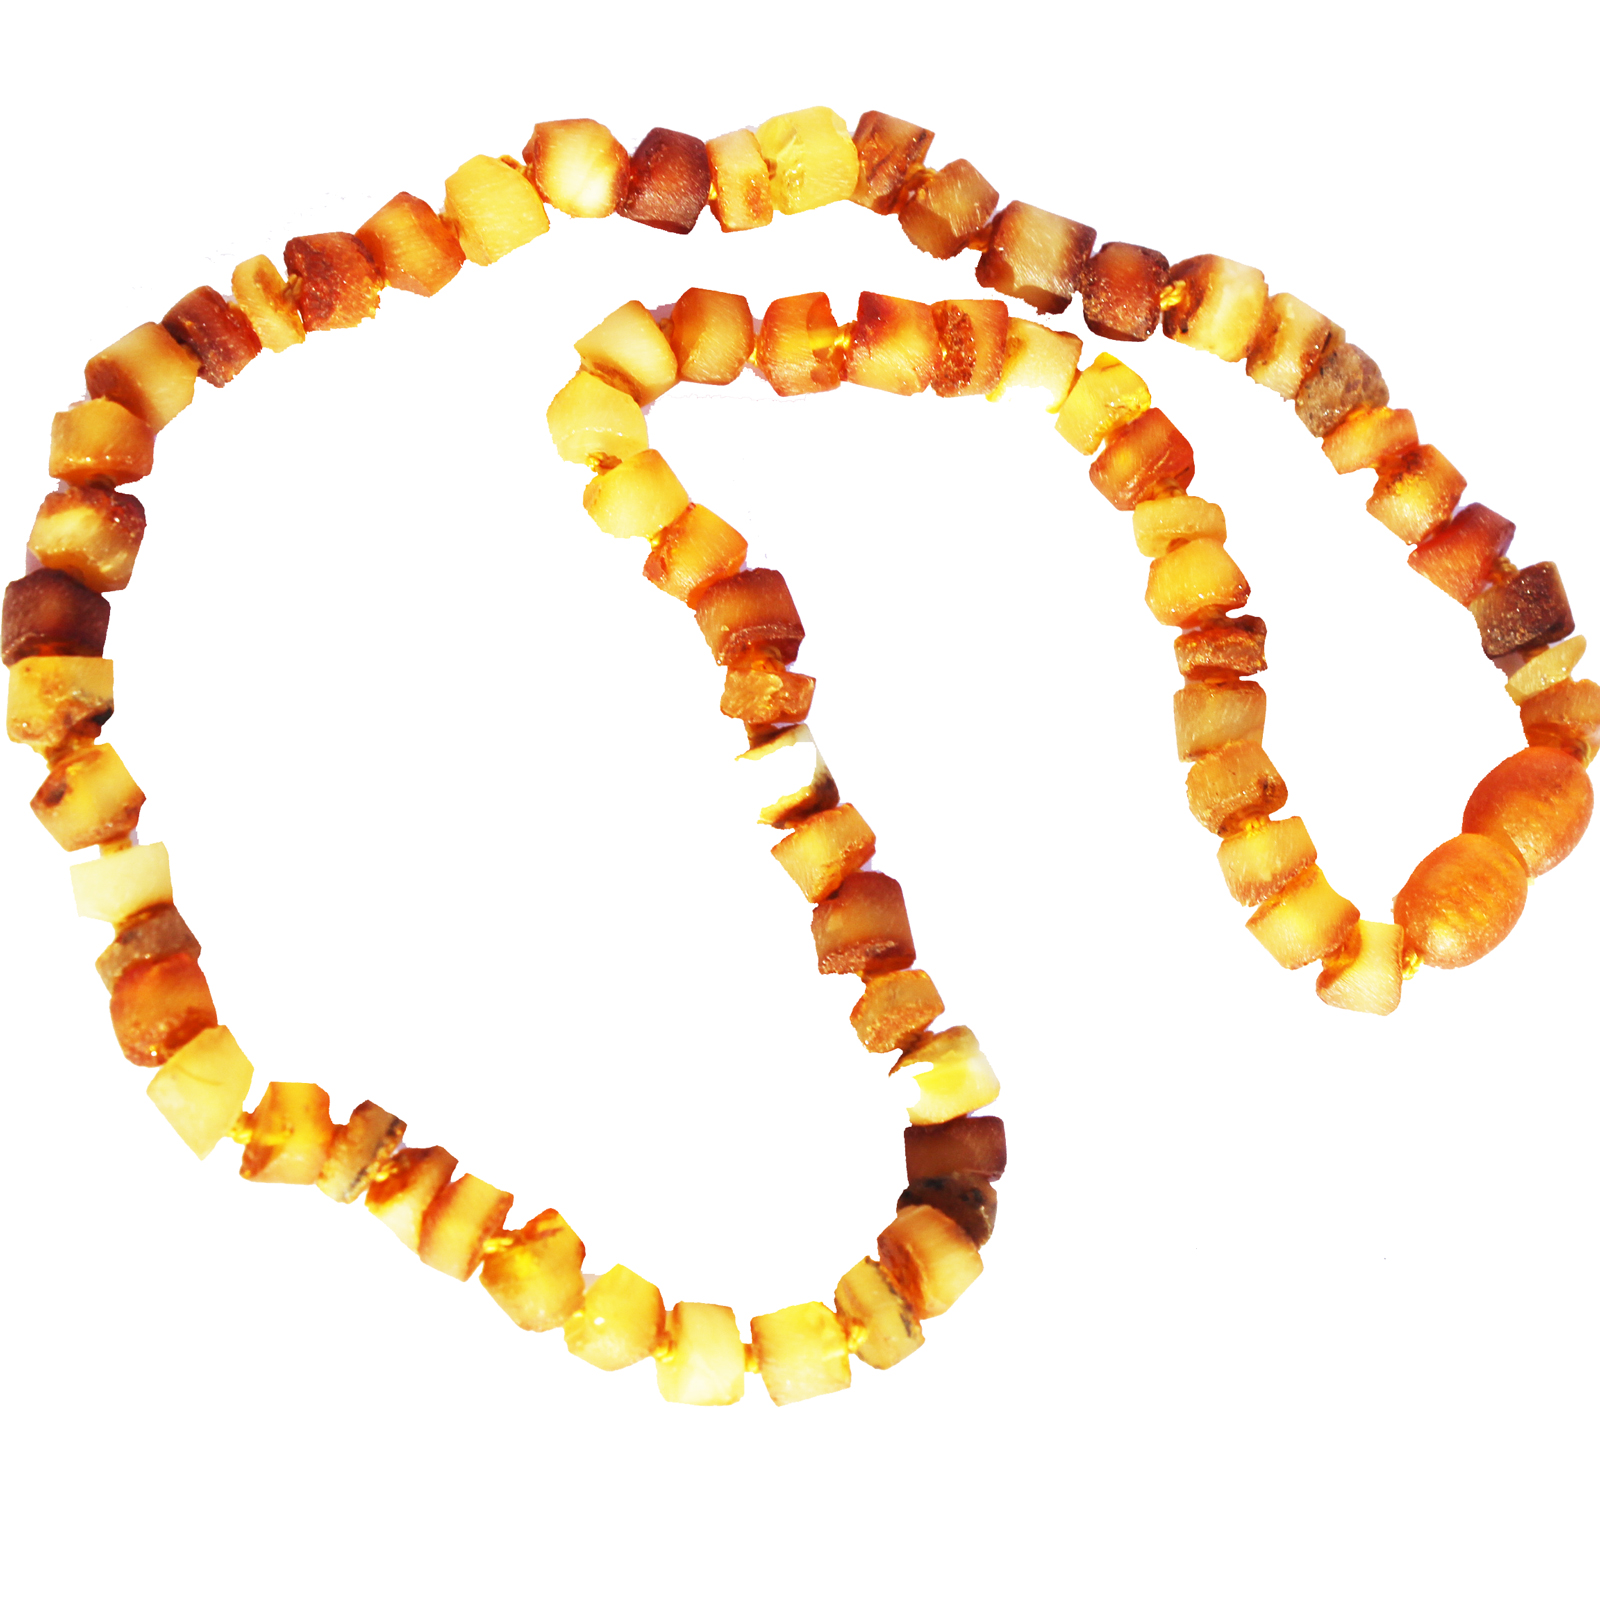 Amber Necklace - Teen creative